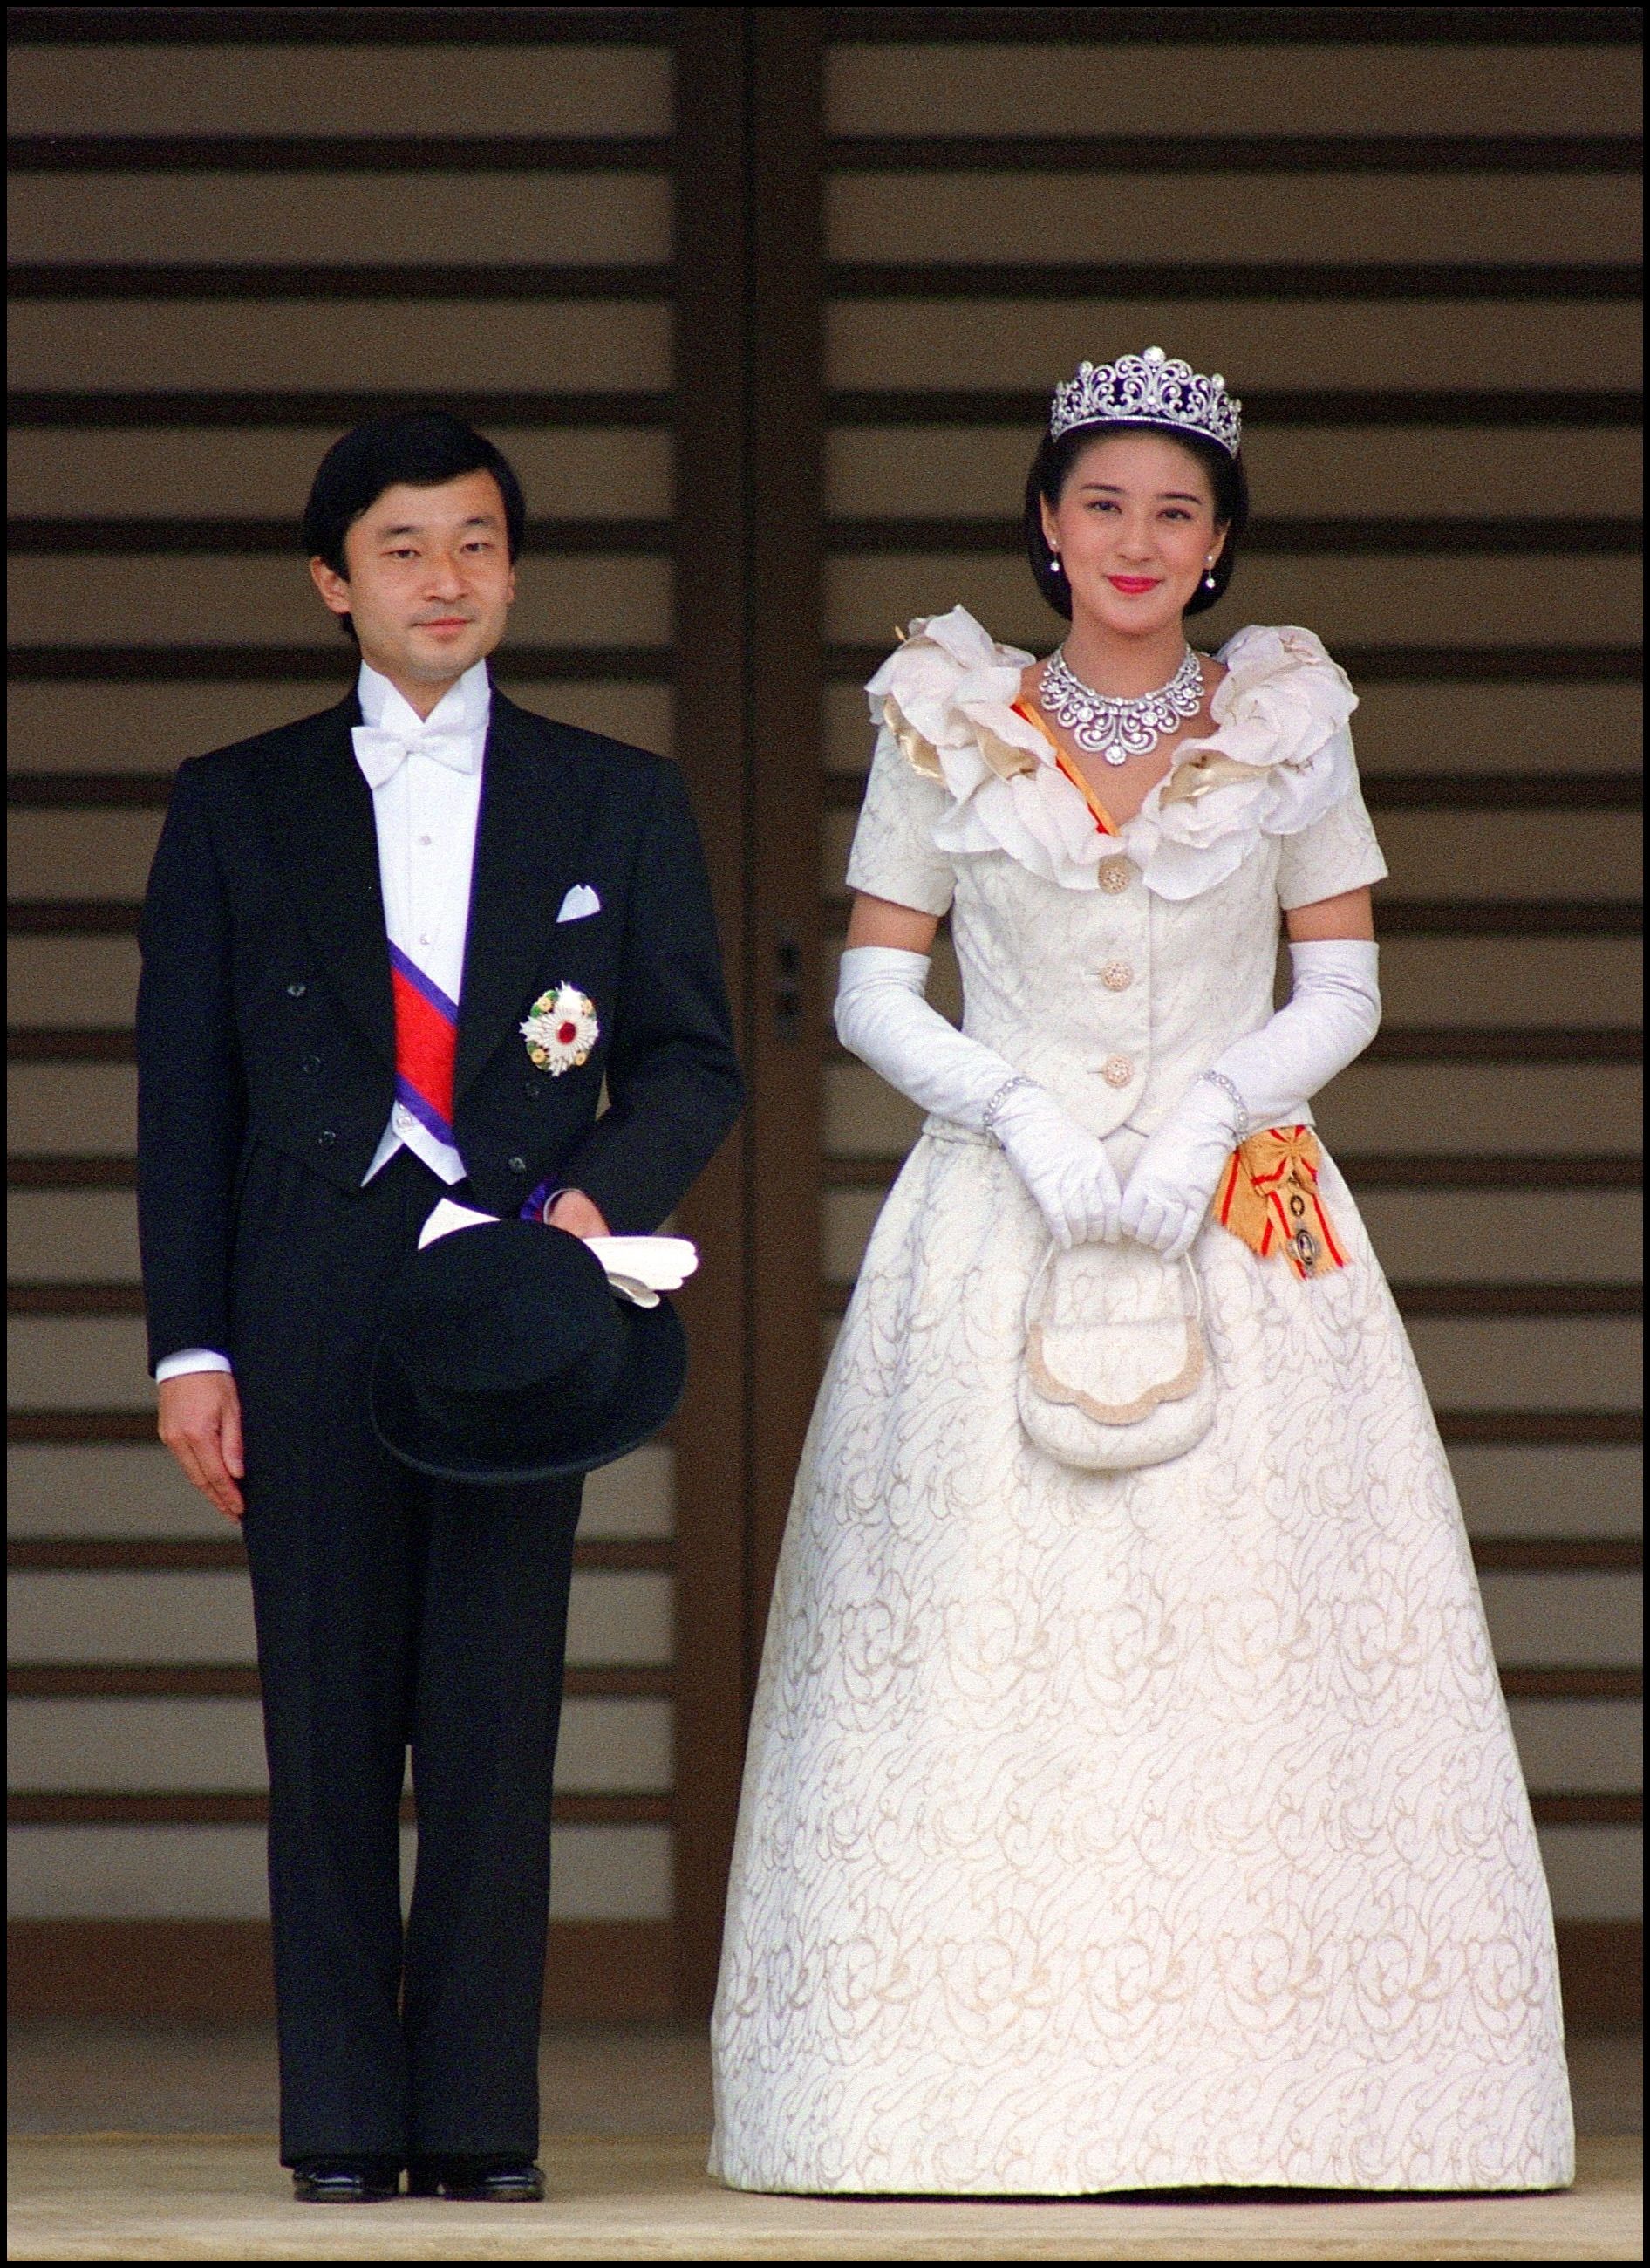 The Japanese Royal Family in Photos Who Are the Japanese Royal Family